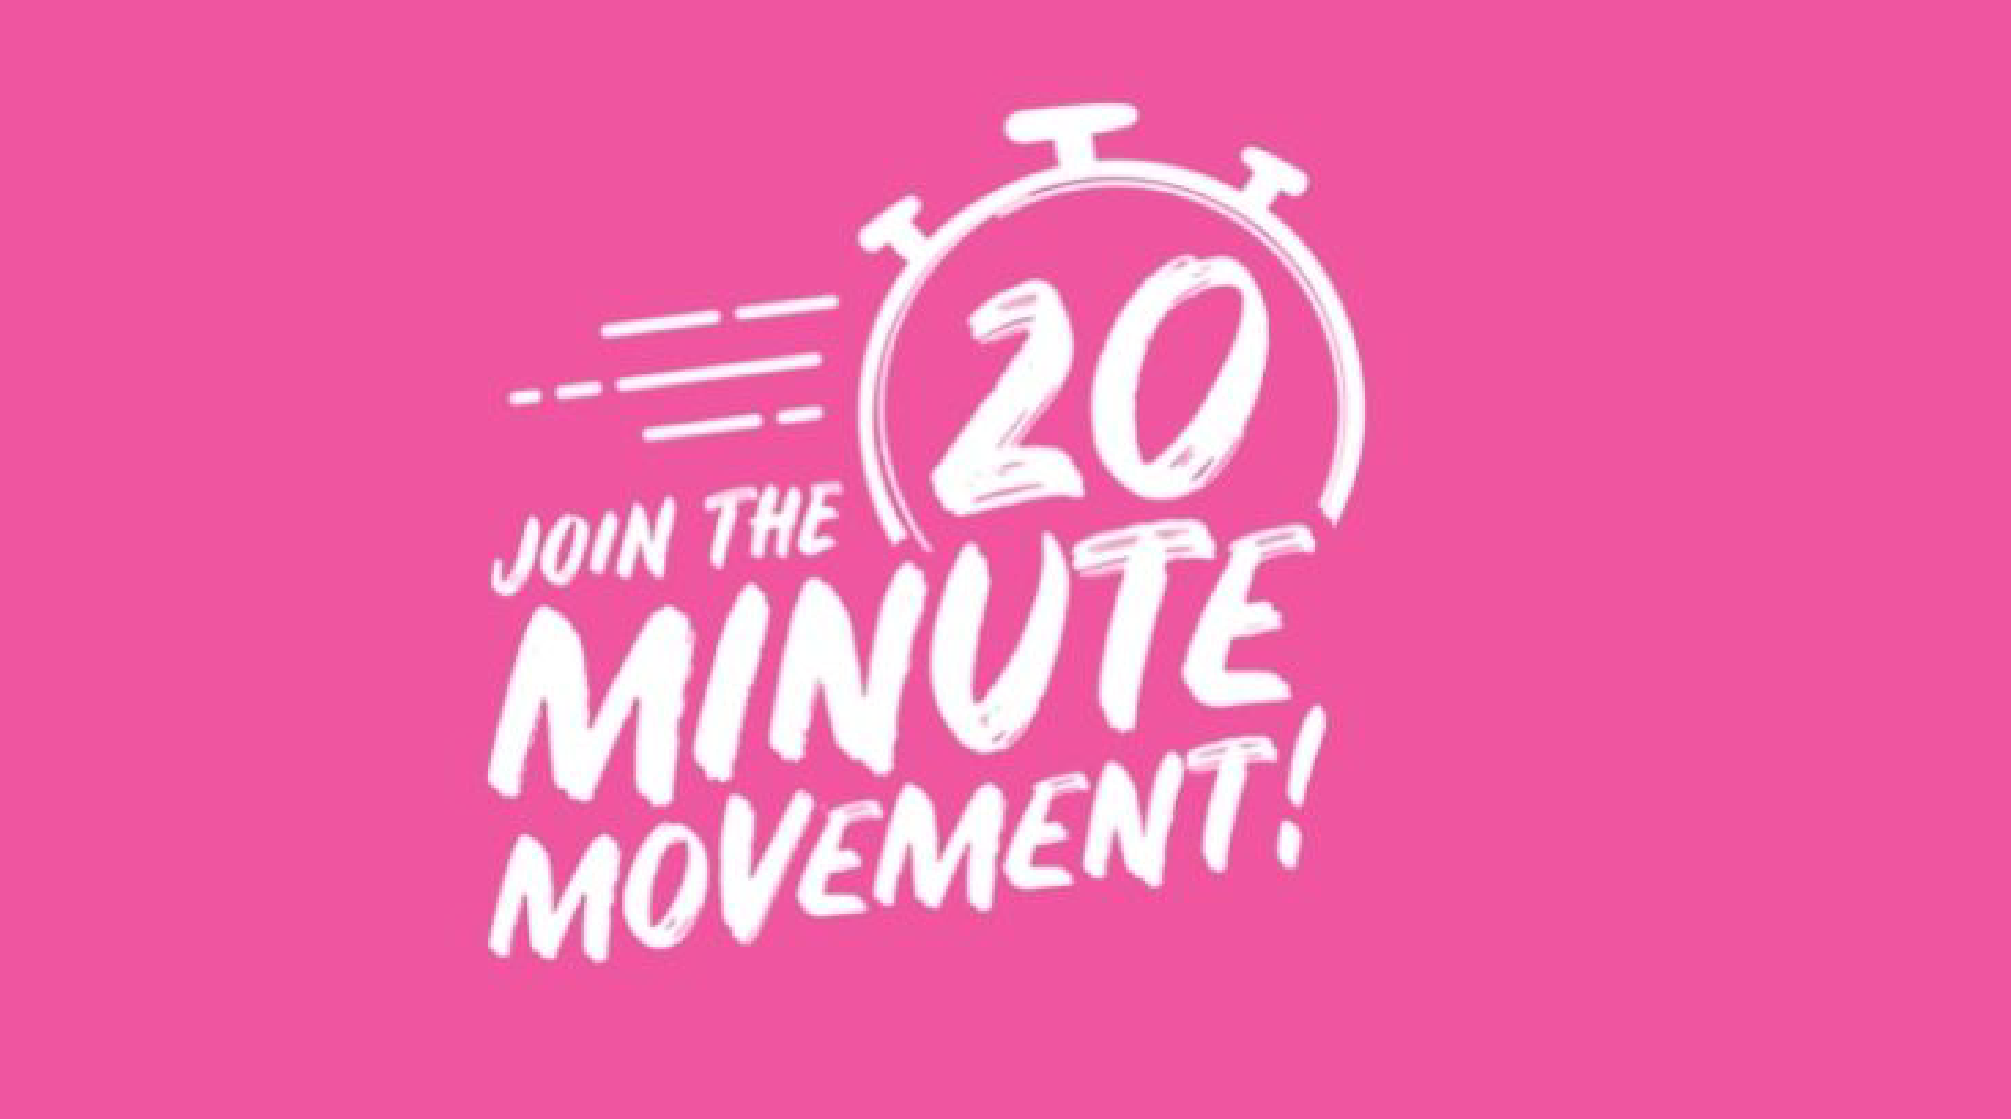 Campaign Spotlight: Join the 20 Minute Movement